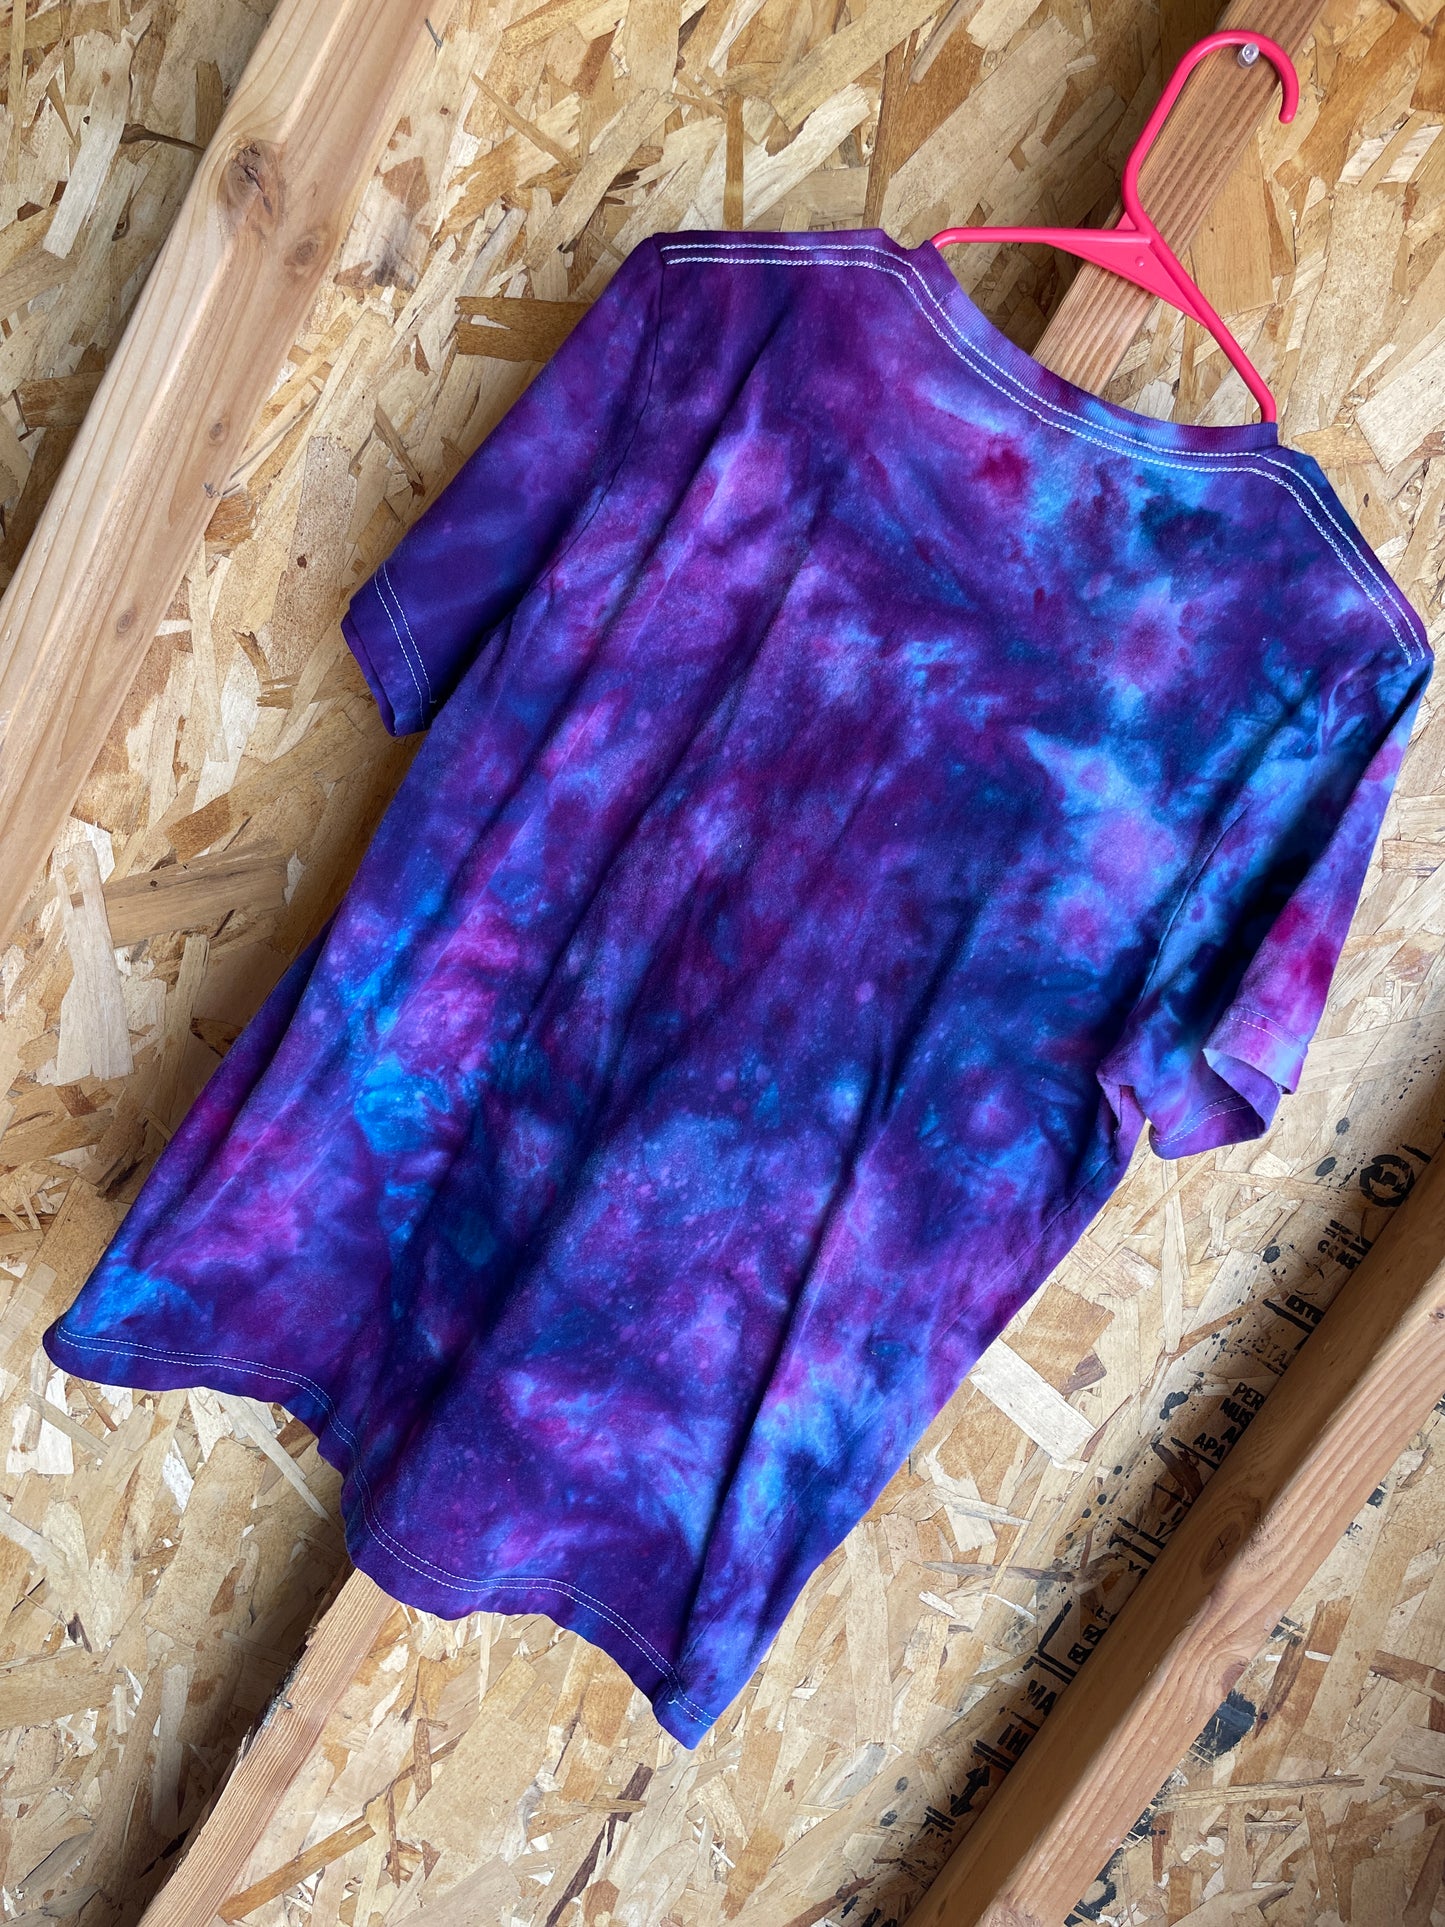 Large Men's Babes Supporting Babes Handmade Tie Dye T-Shirt | Blue and Purple Galaxy Ice Dye Tie Dye Short Sleeve